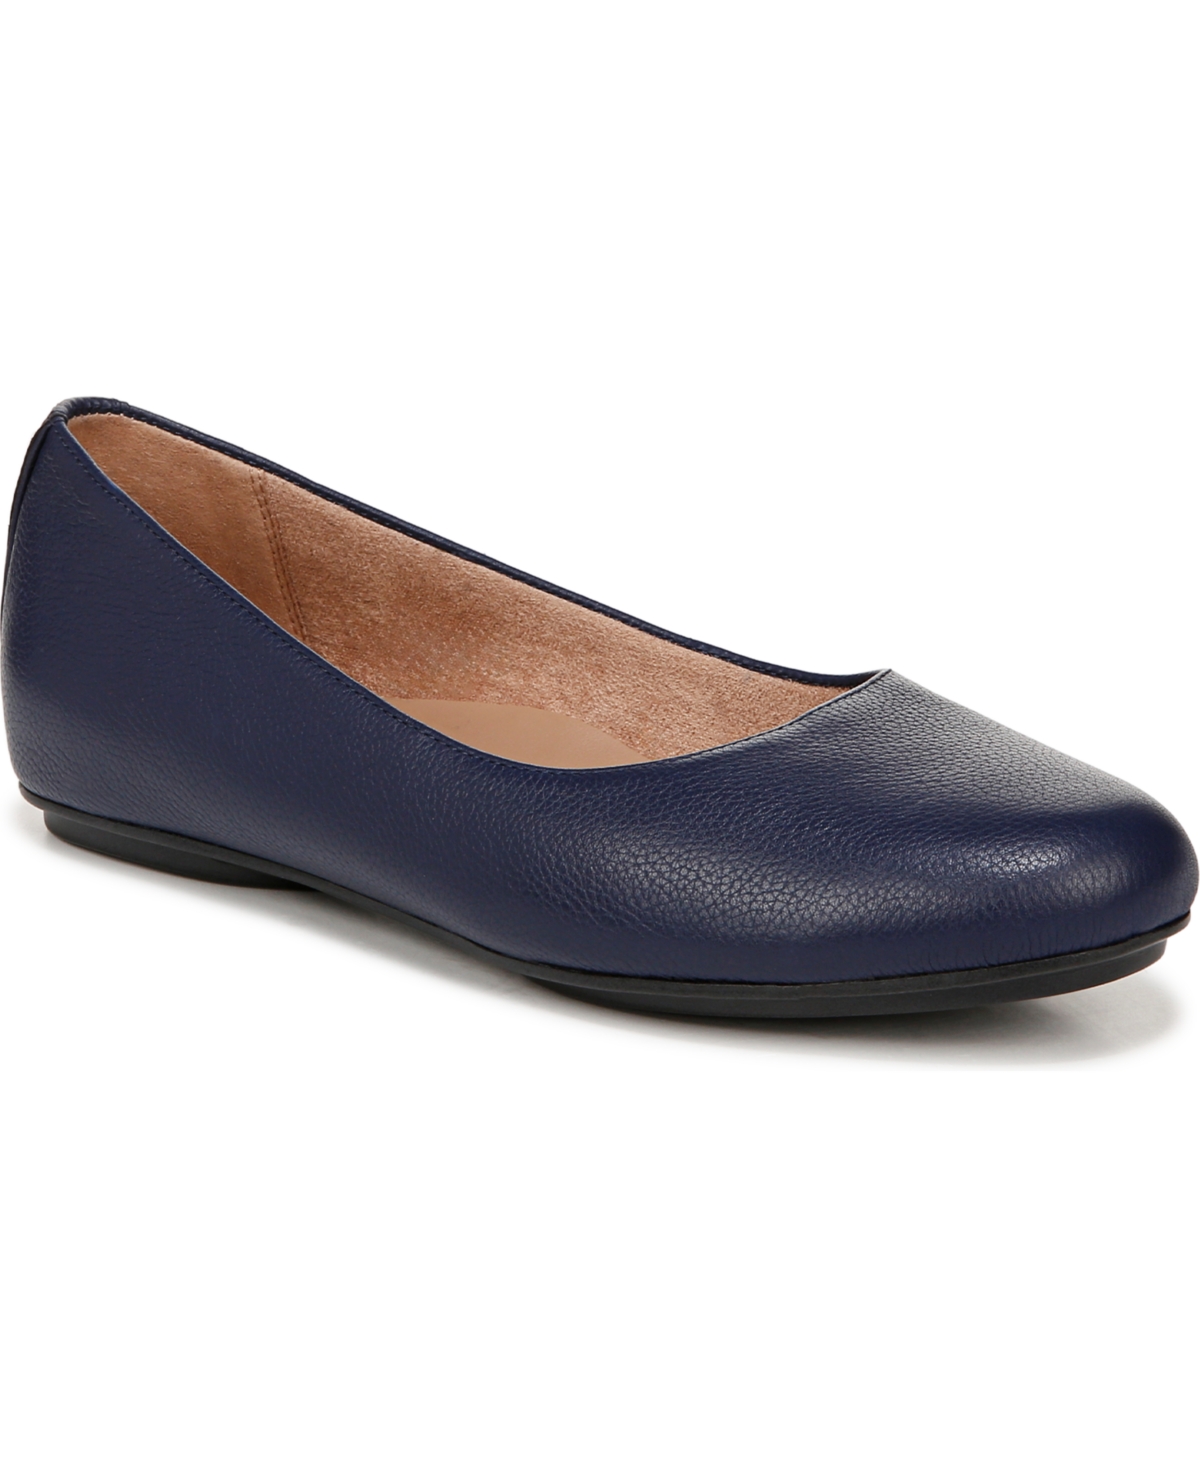 Maxwell Ballet Flats - Midnight Blue Leather